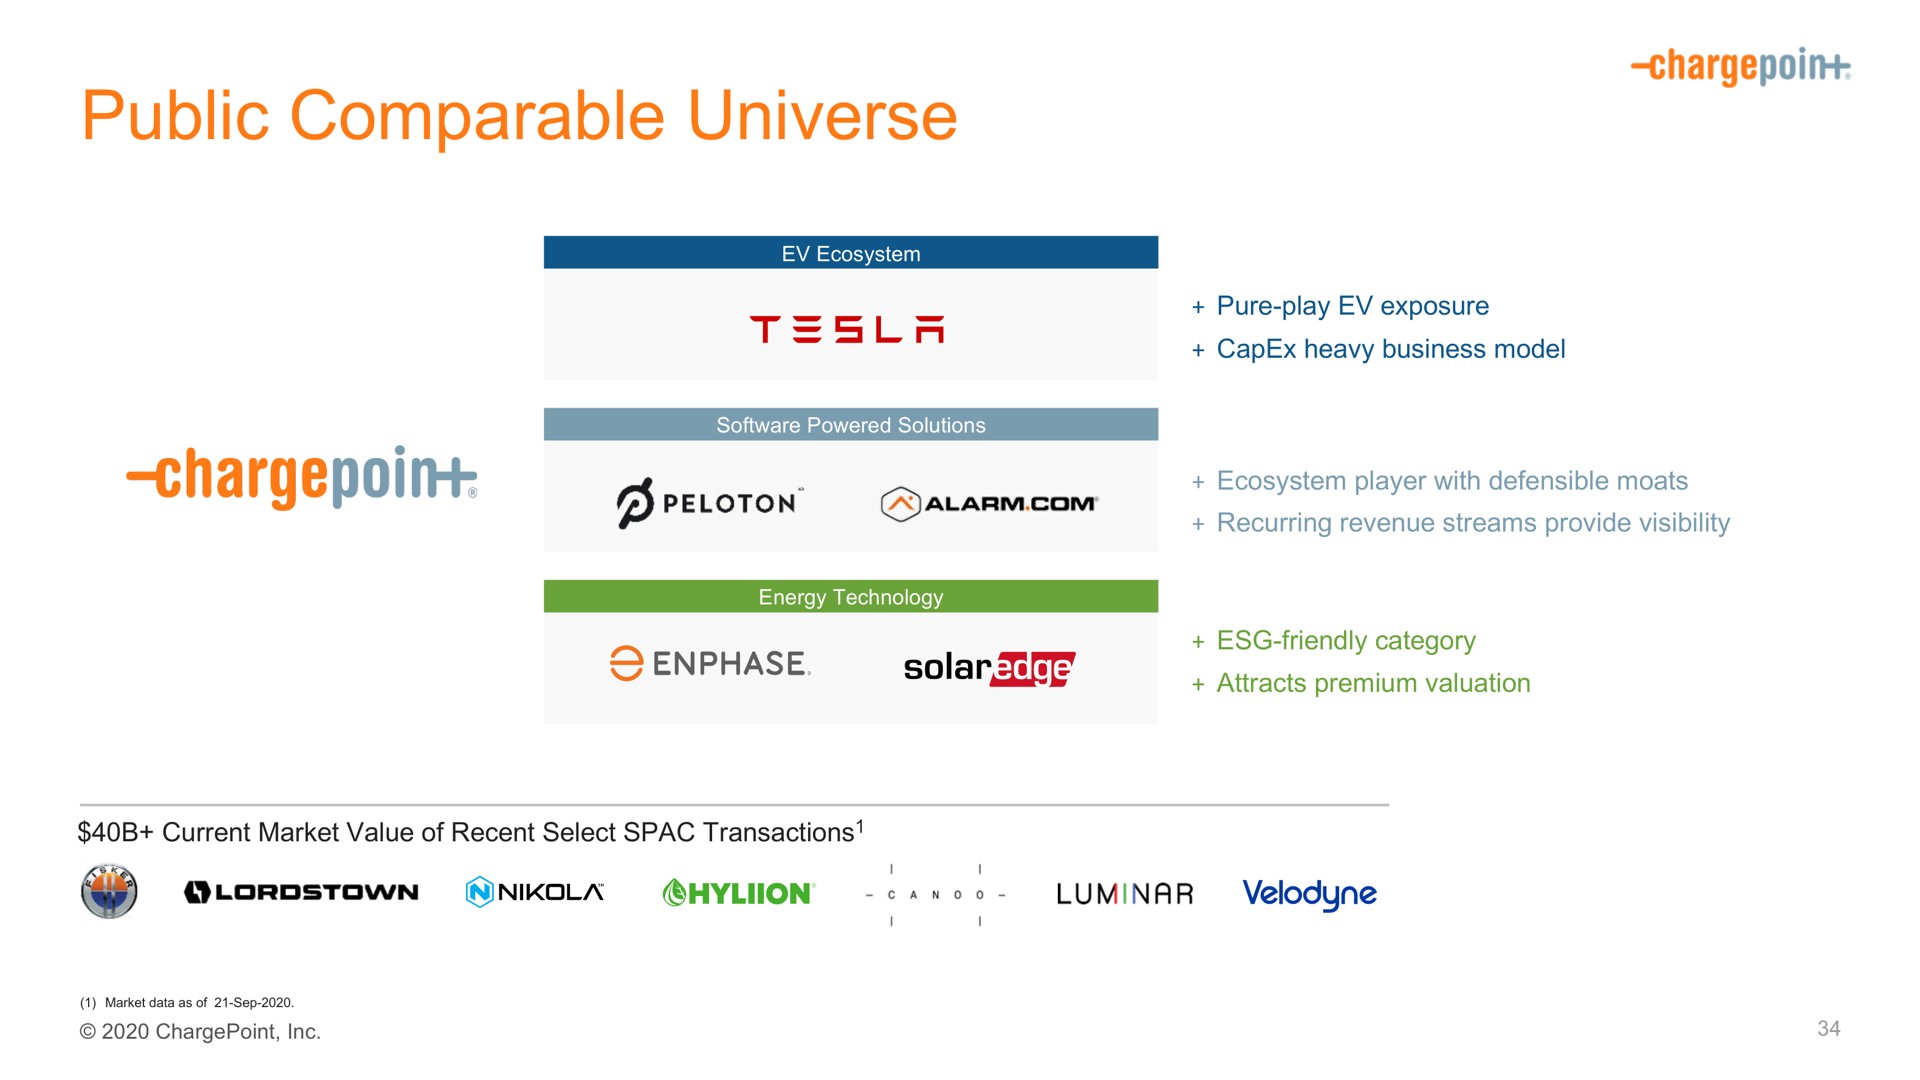 public comparable universe | ChargePoint